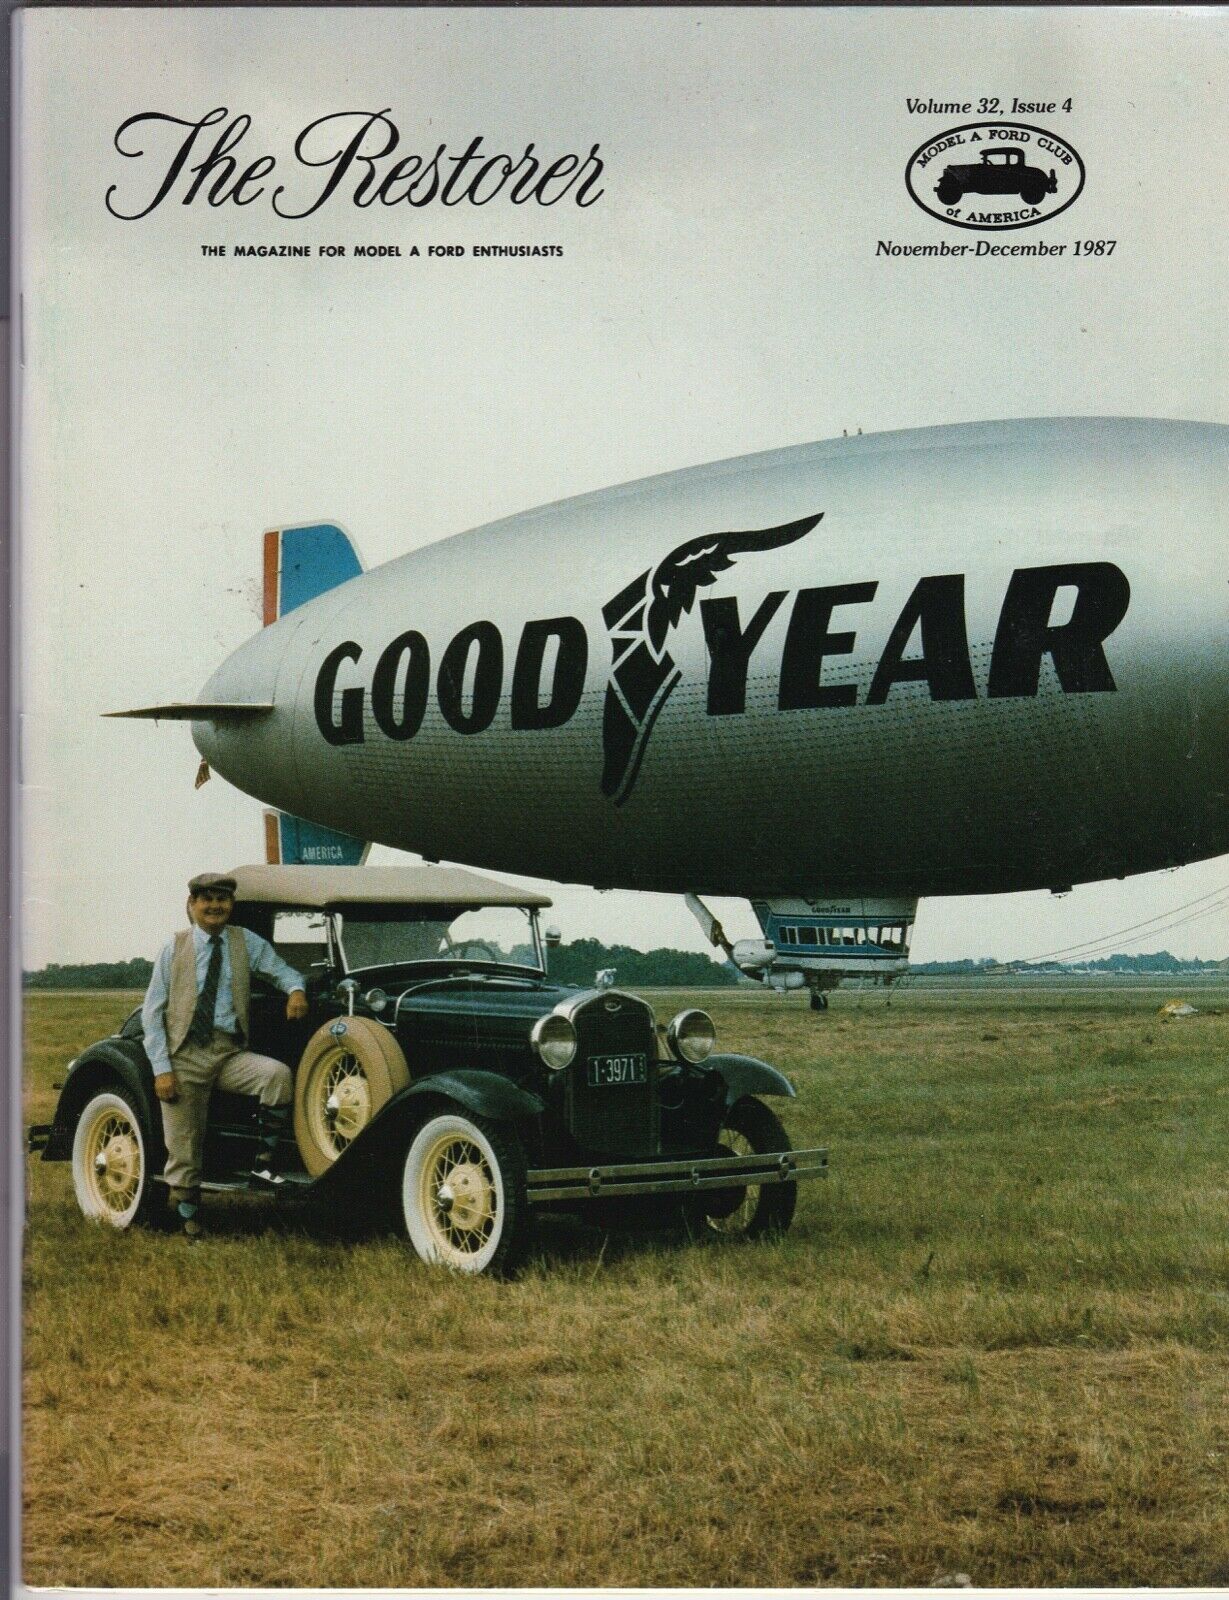 1931 DELUXE ROADSTER GOODYEAR BLIMP - THE RESTORE CAR MAGAZINE, SPACE SHUTTLE 